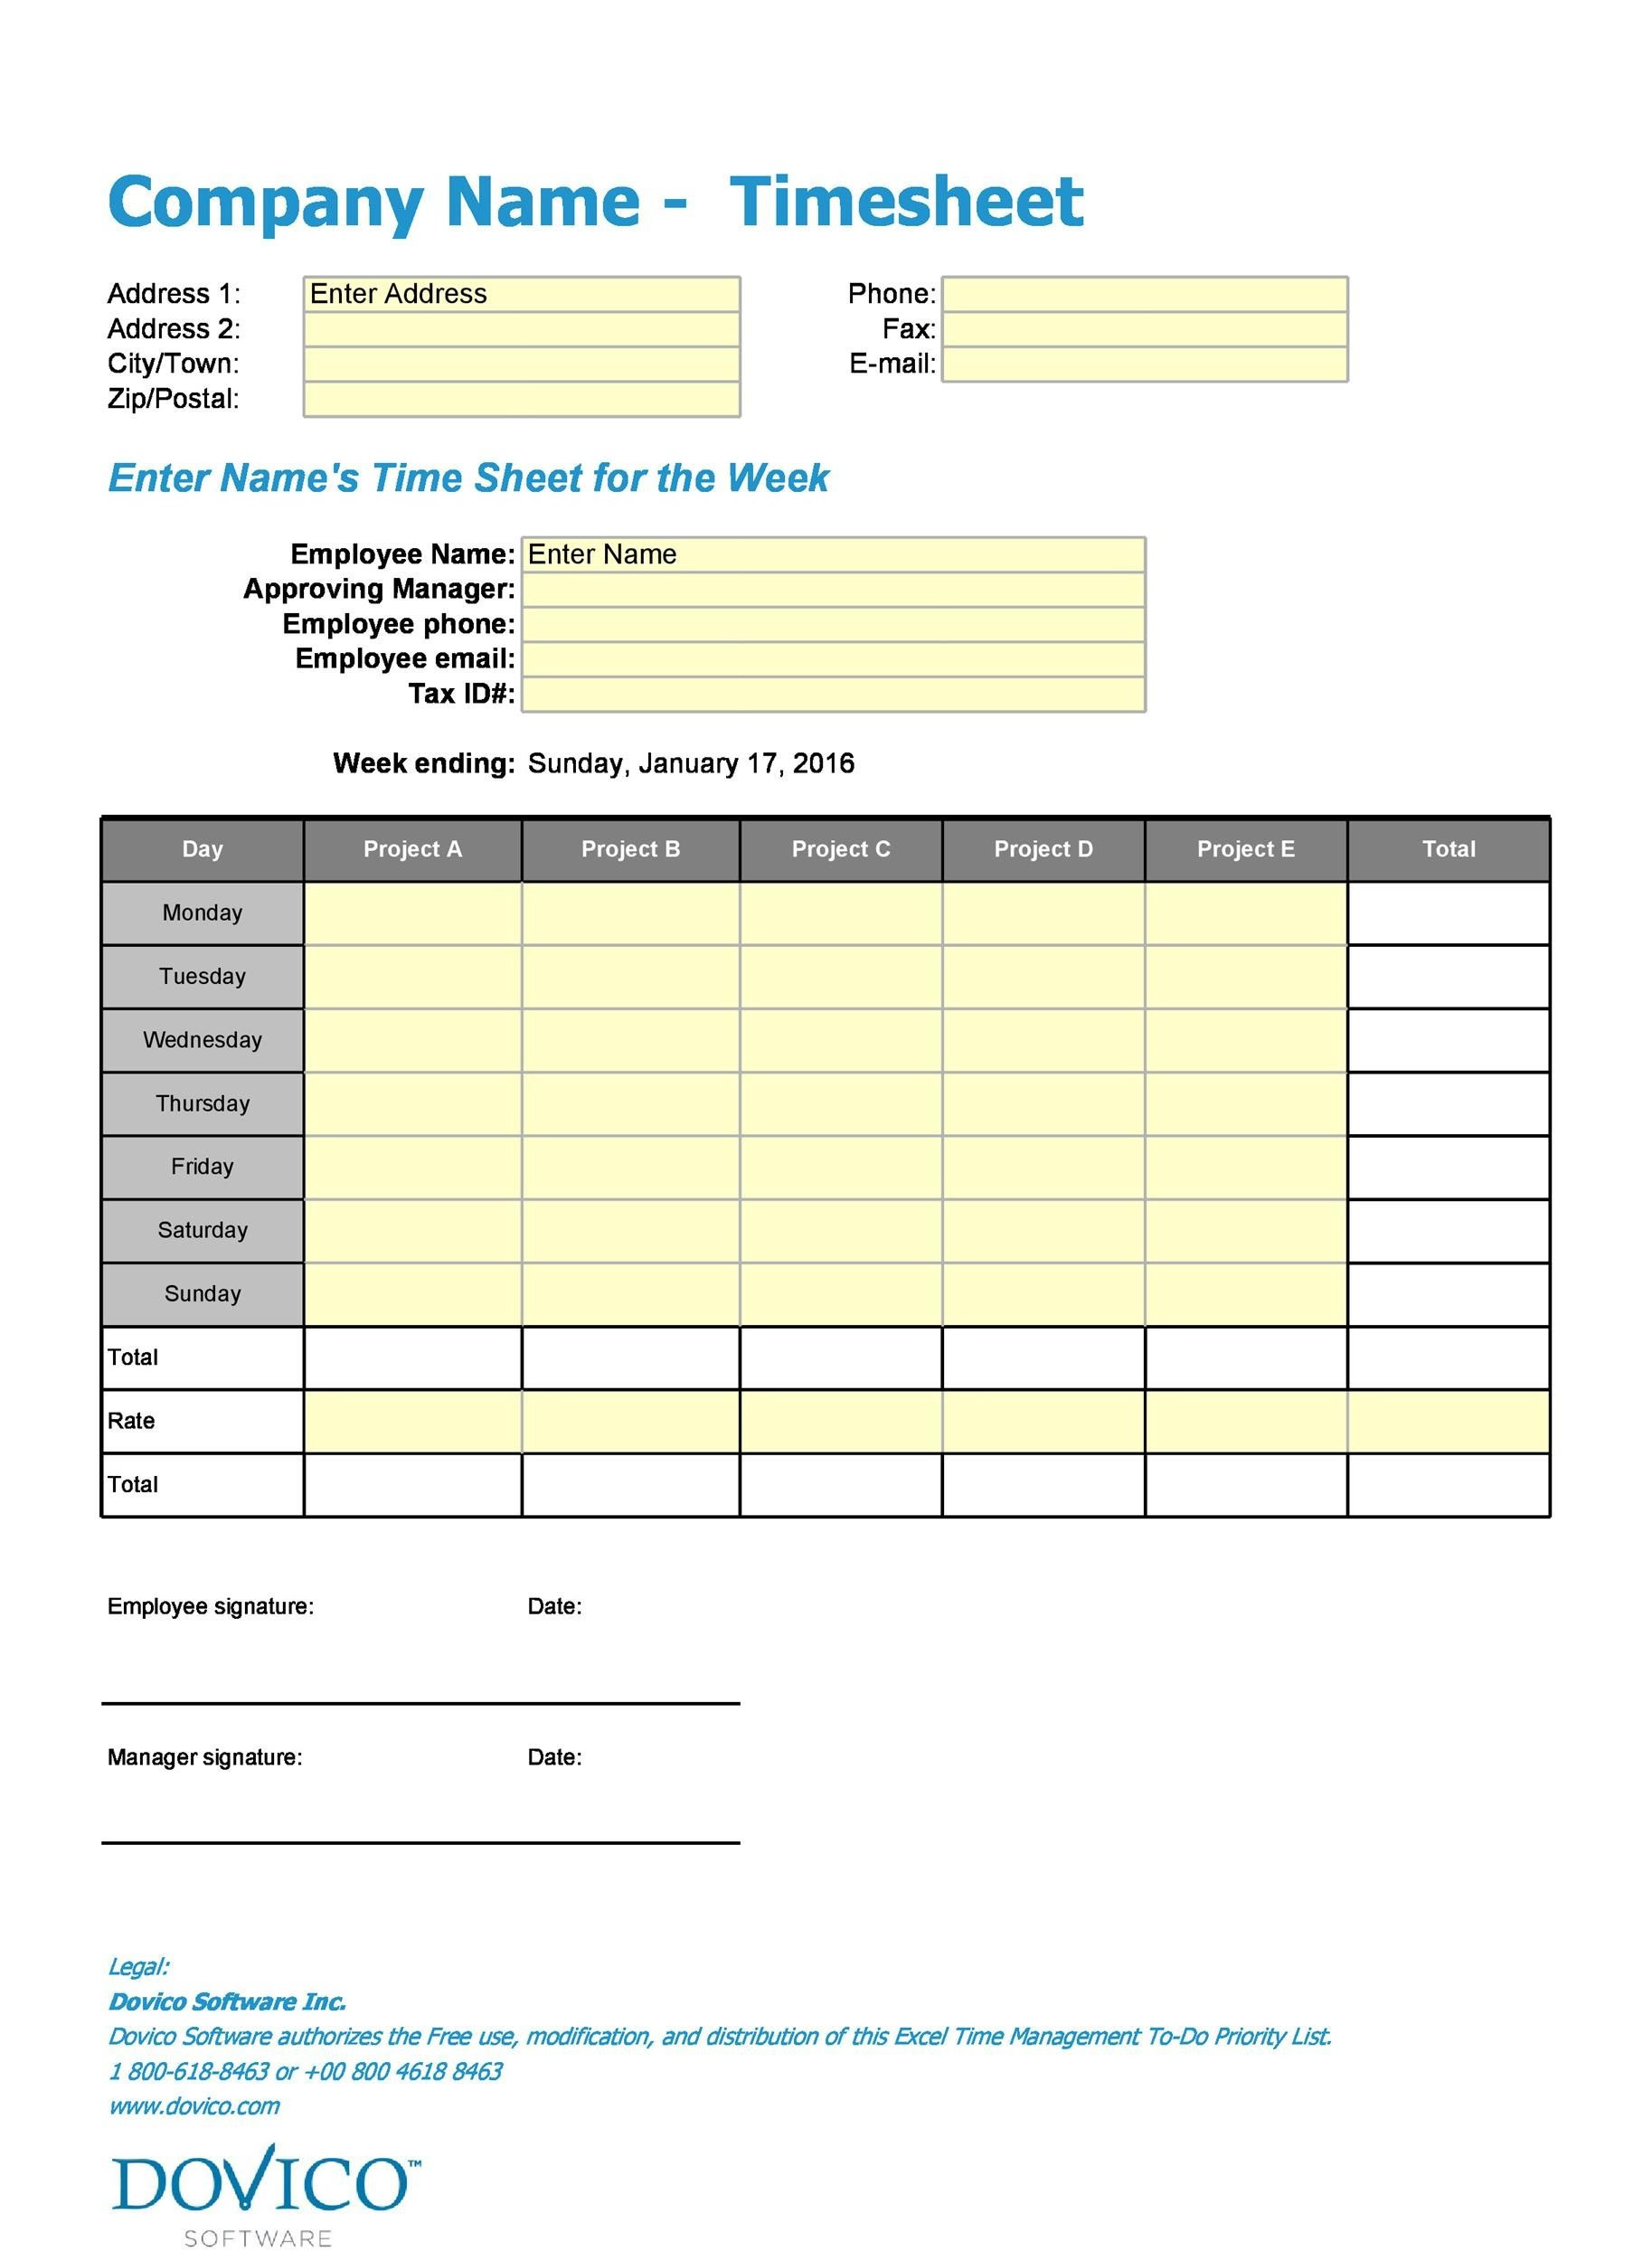 timesheet-template-for-salaried-employees-best-of-document-template